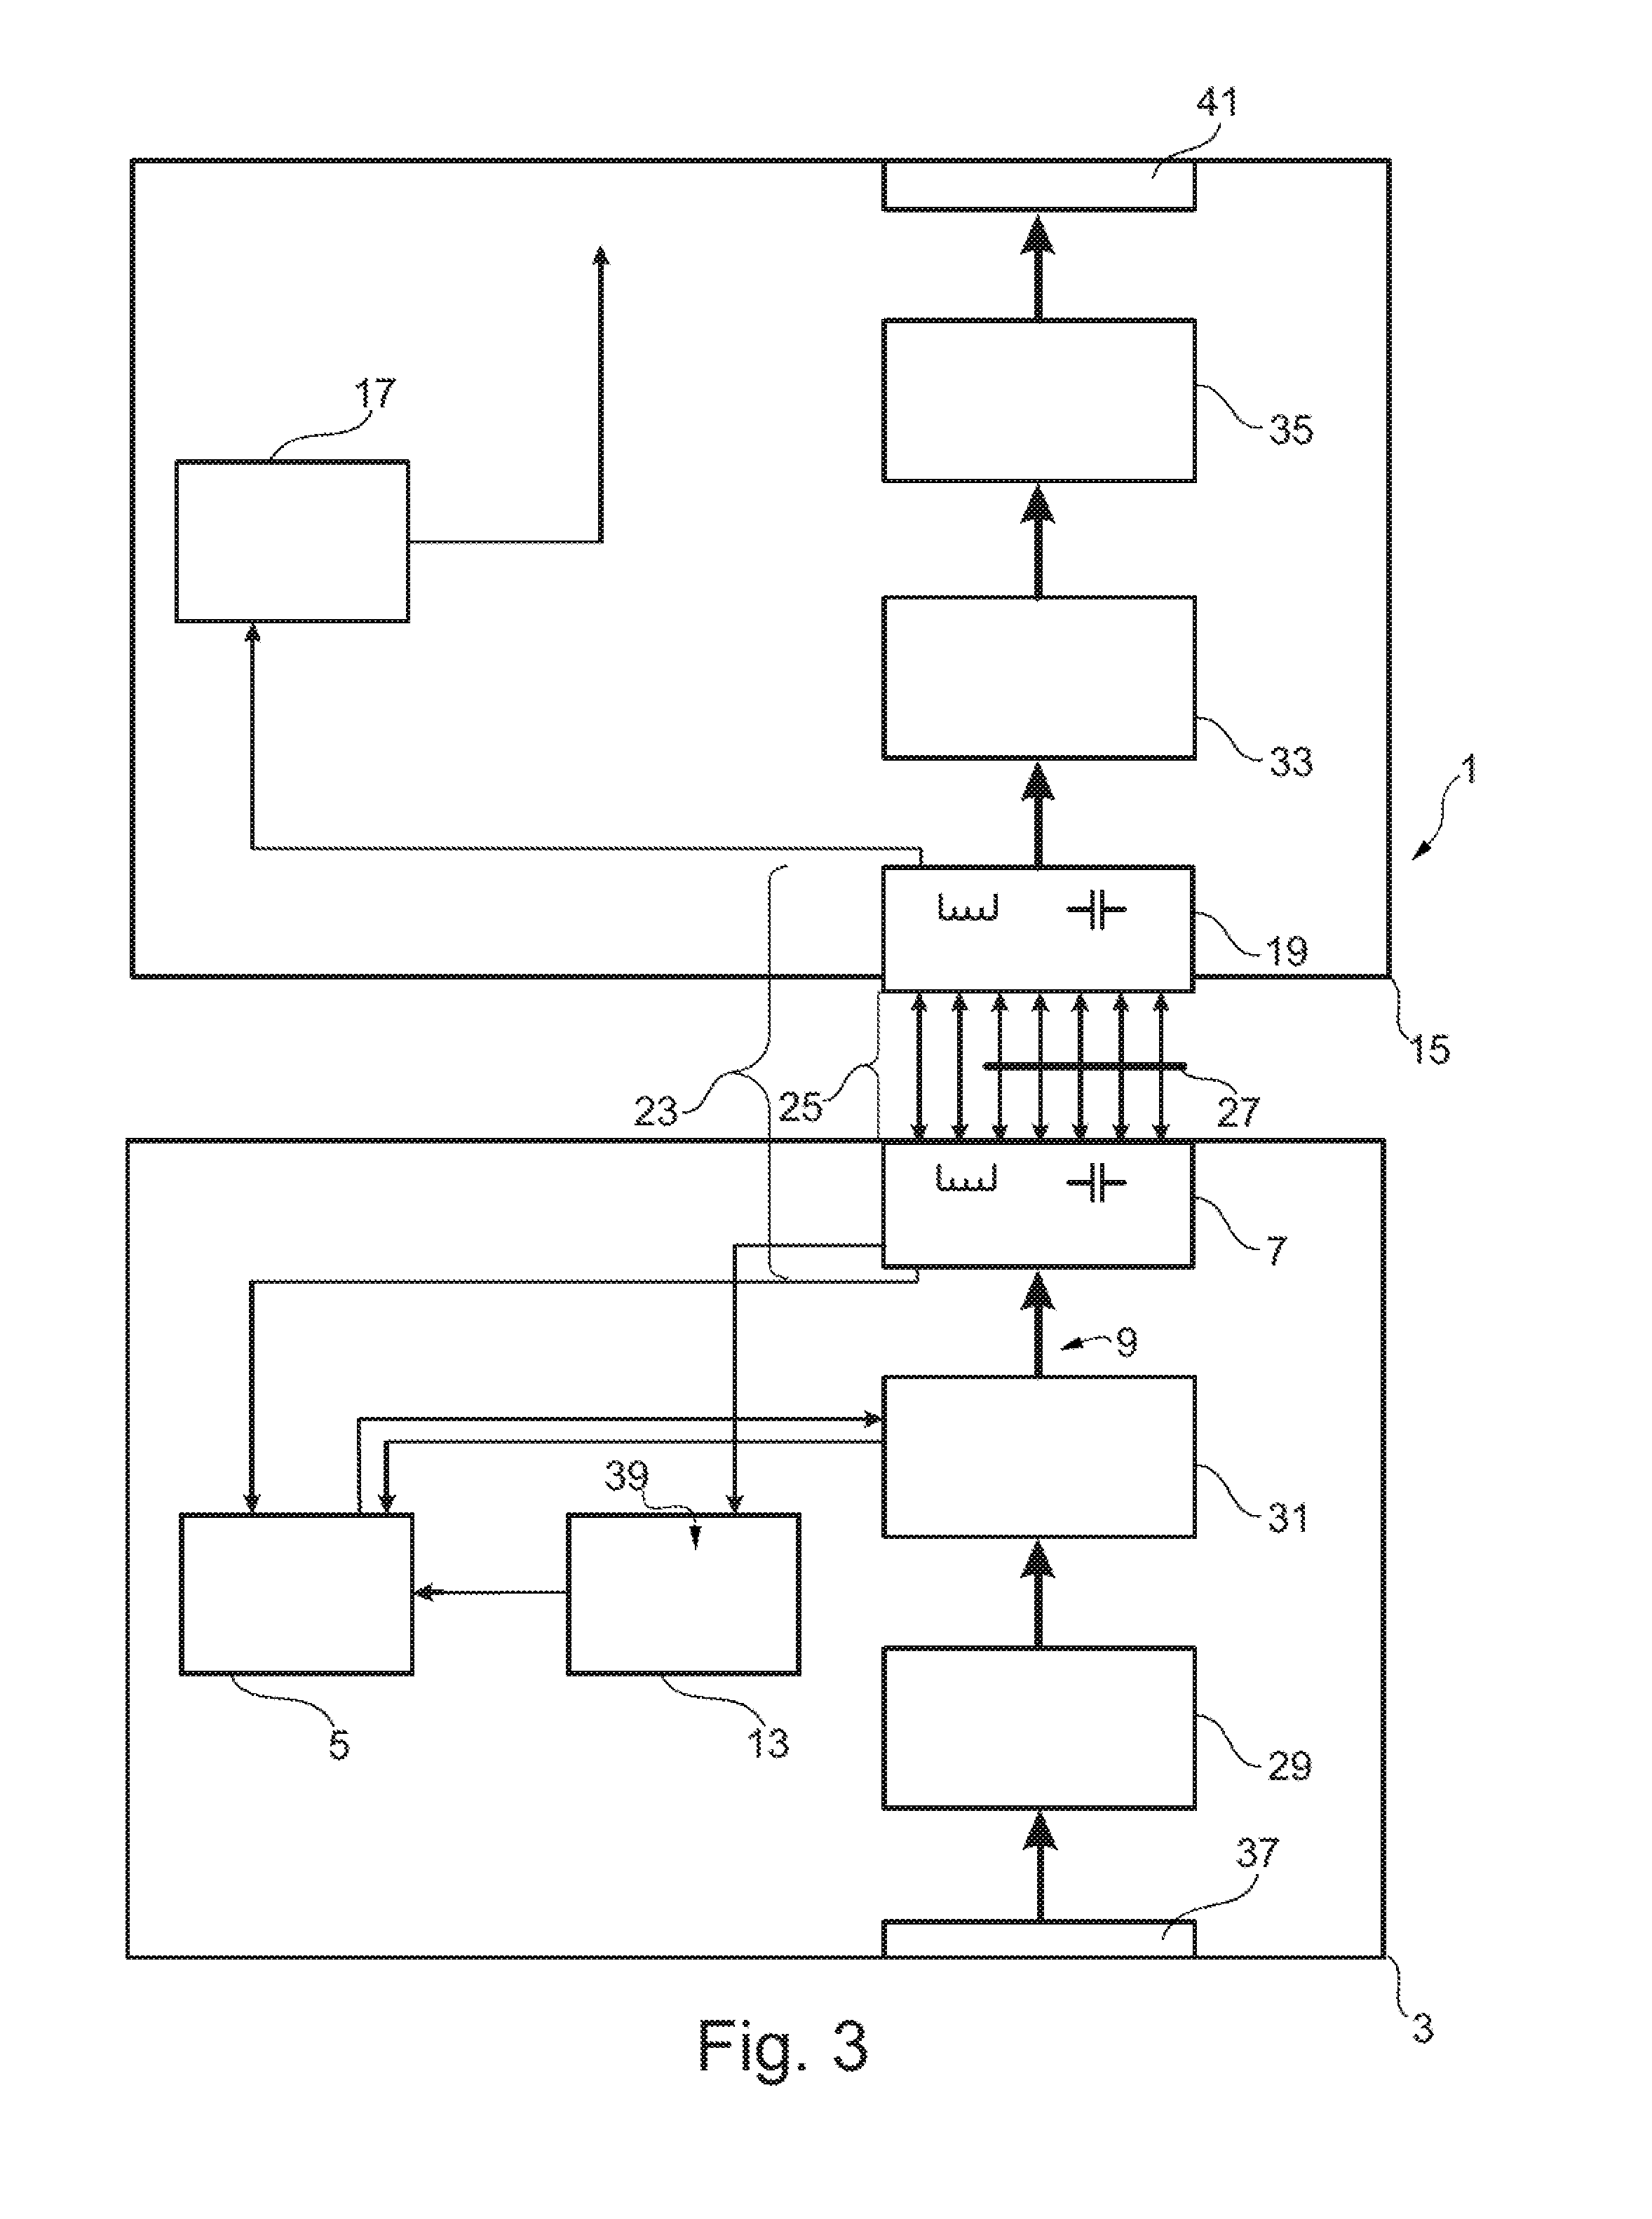 Detection of an electrically conductive foreign object in an inductive transmission path